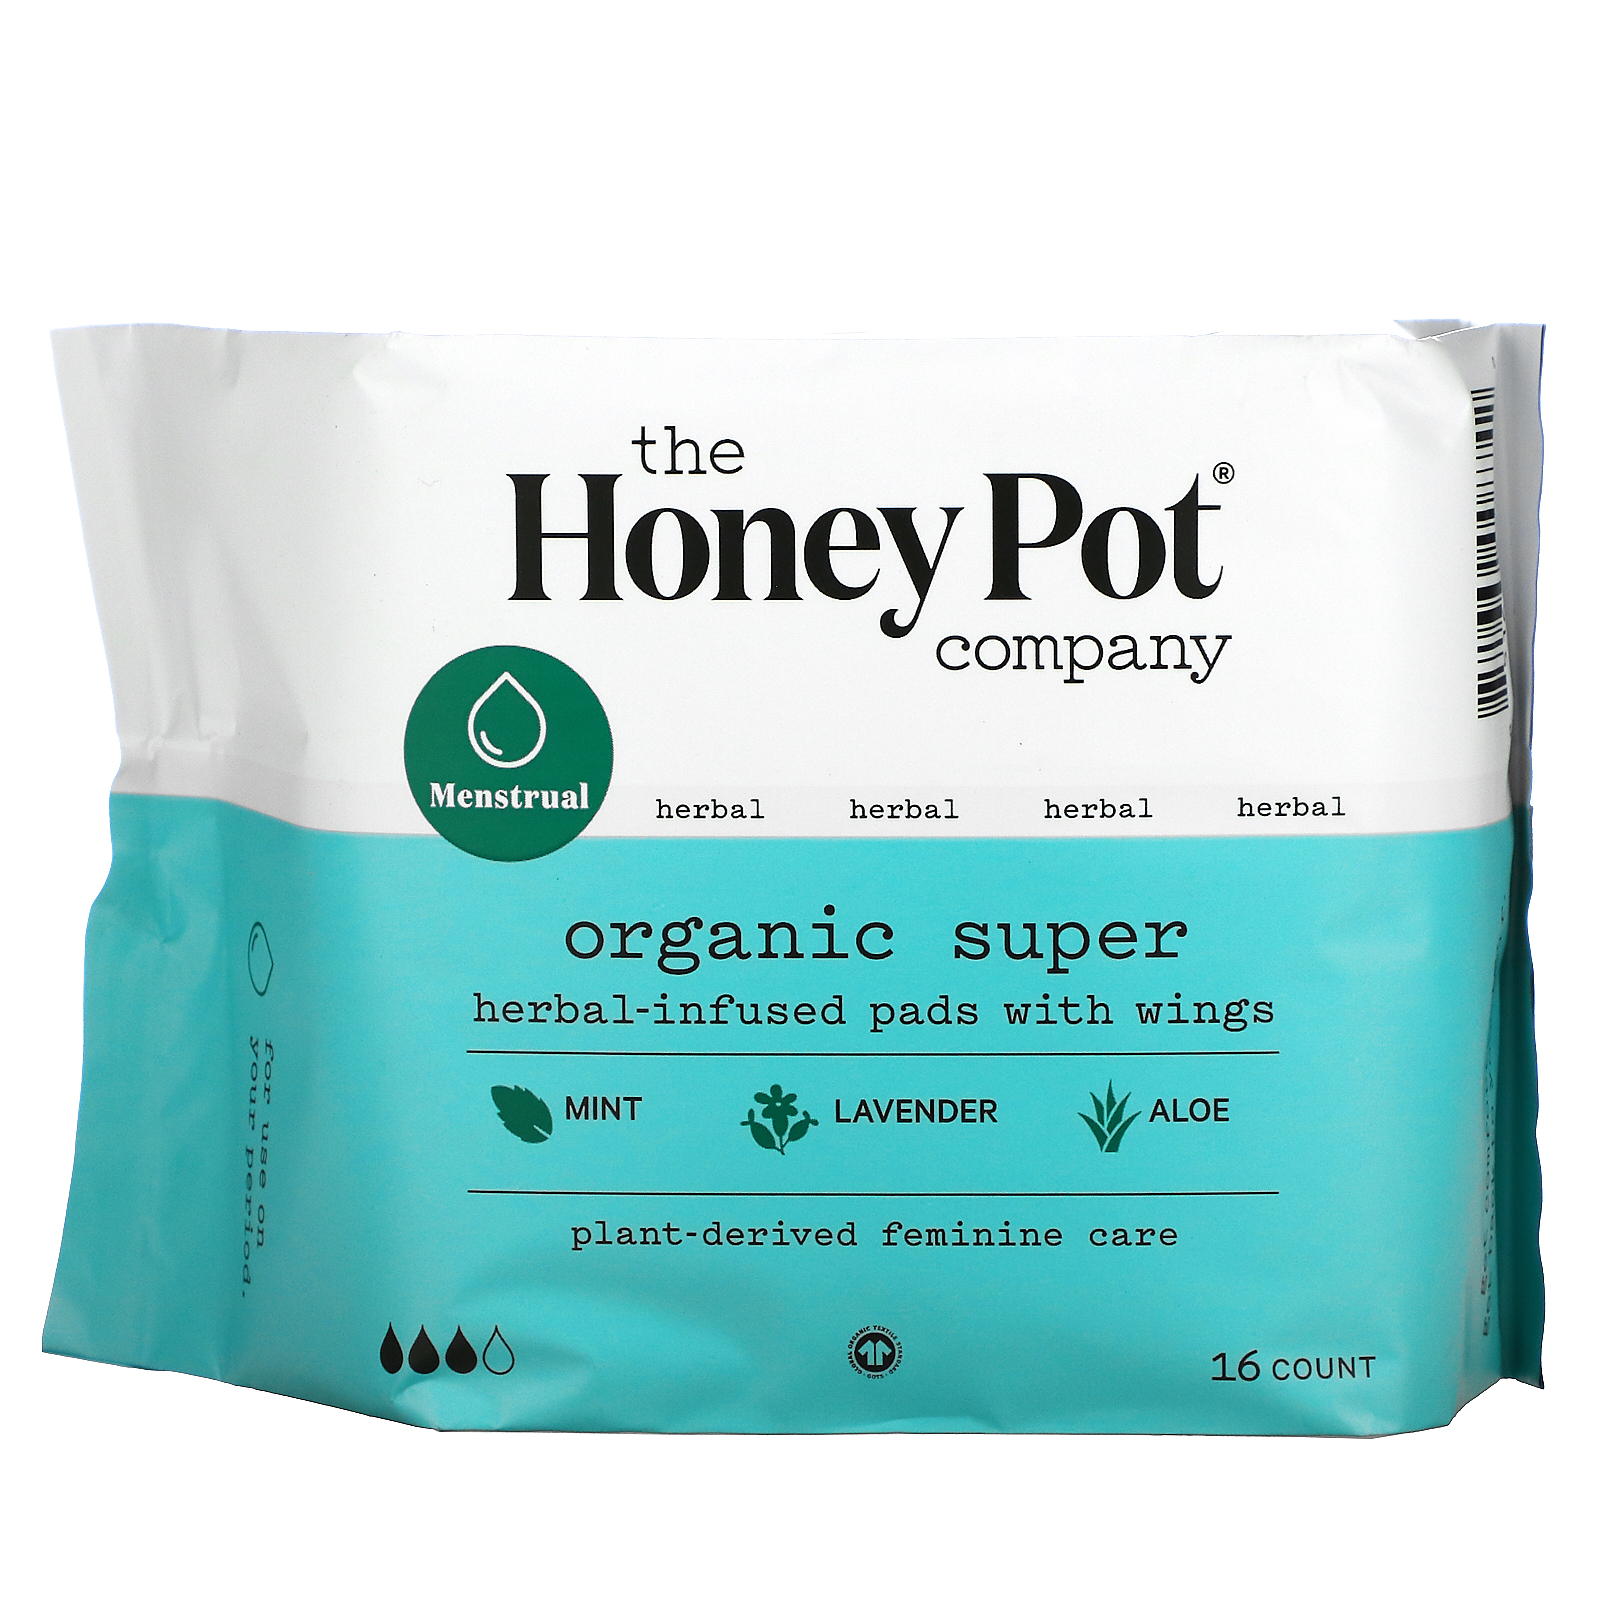 The Honey Pot Company, Organic Super HerbalInfused Pads with Wings, 16